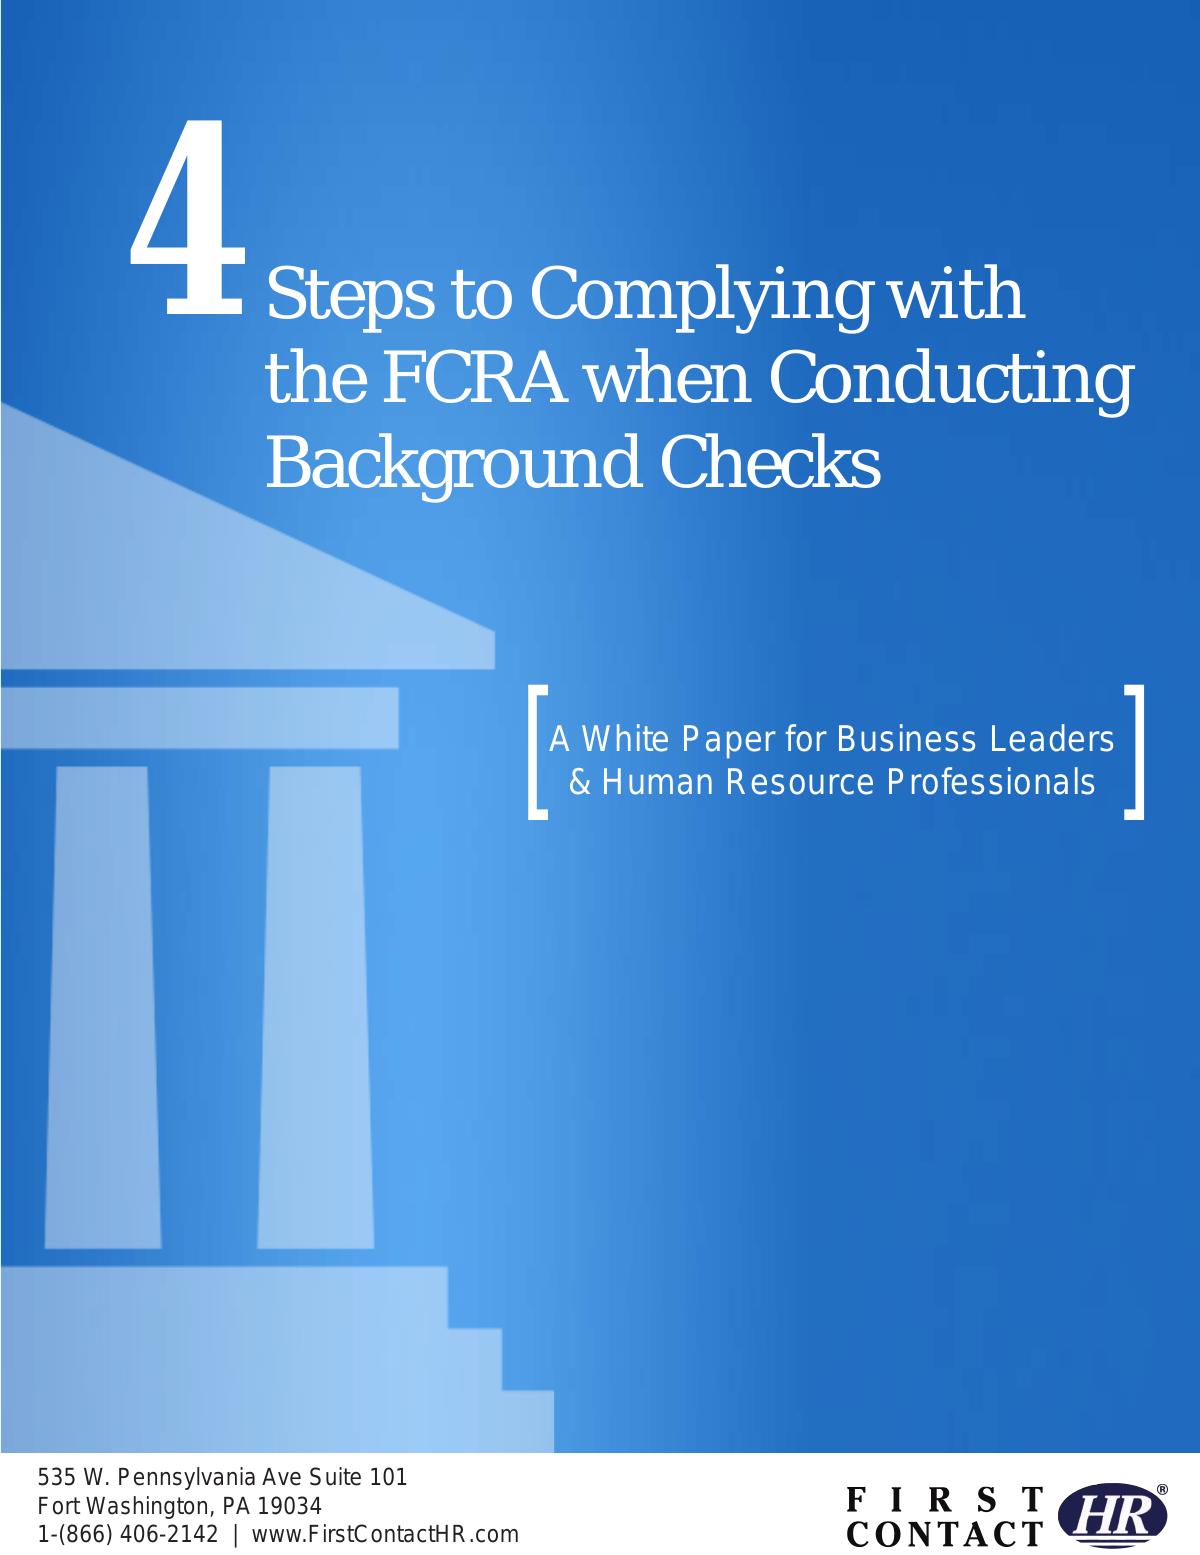 4 Steps to Complying with the FCRA when Conducting Background Checks